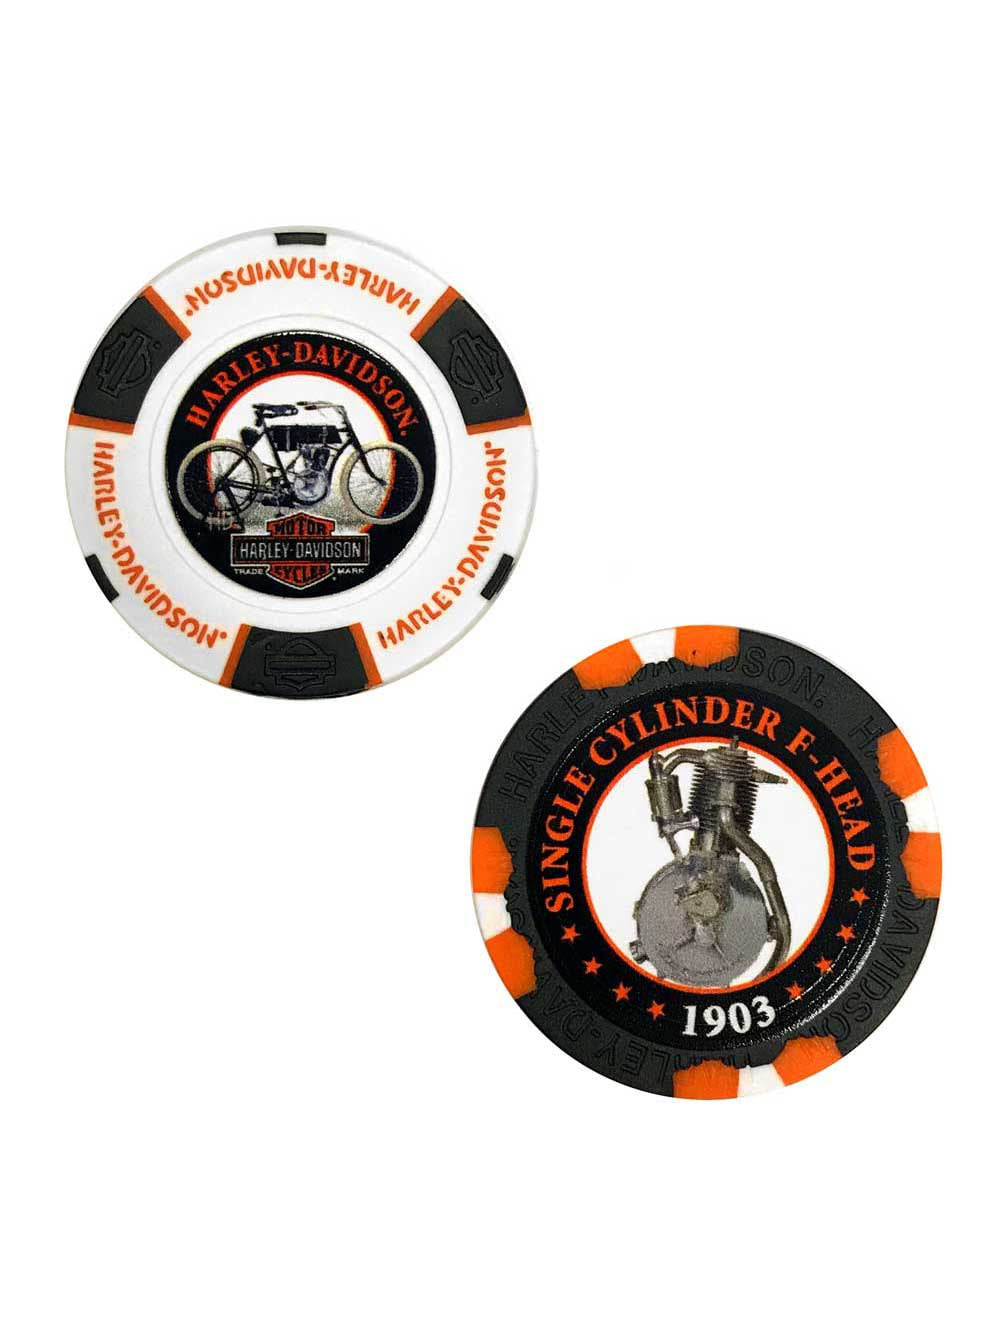 See Details for Colors Available Harley Davidson Hollywood CA Poker Chip